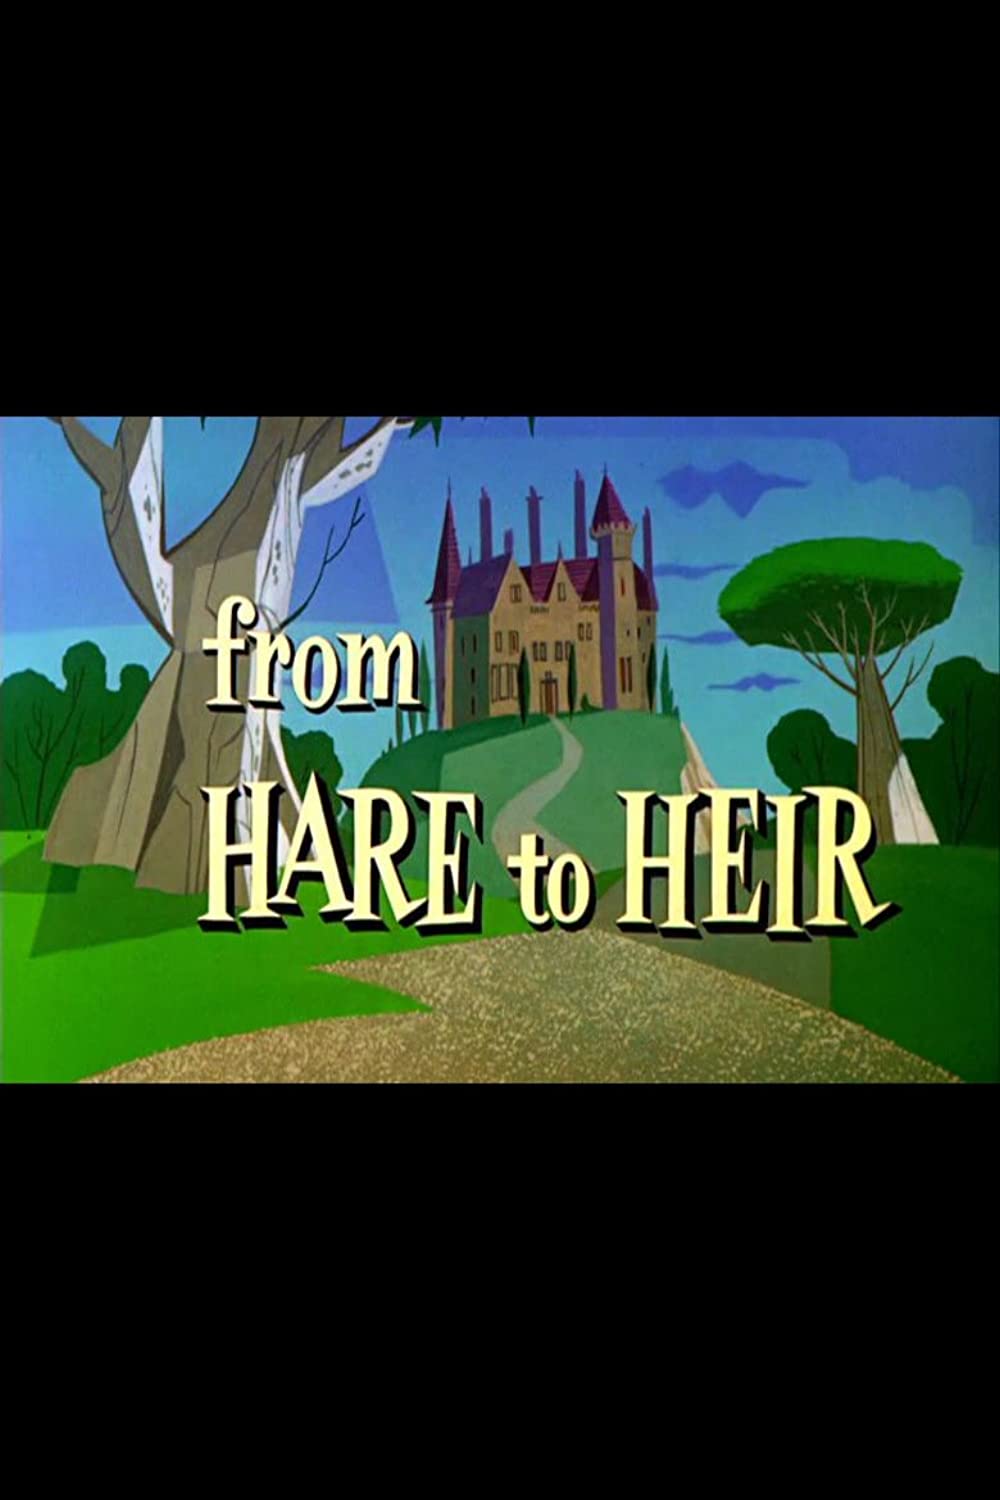 From Hare to Heir (Short 1960)